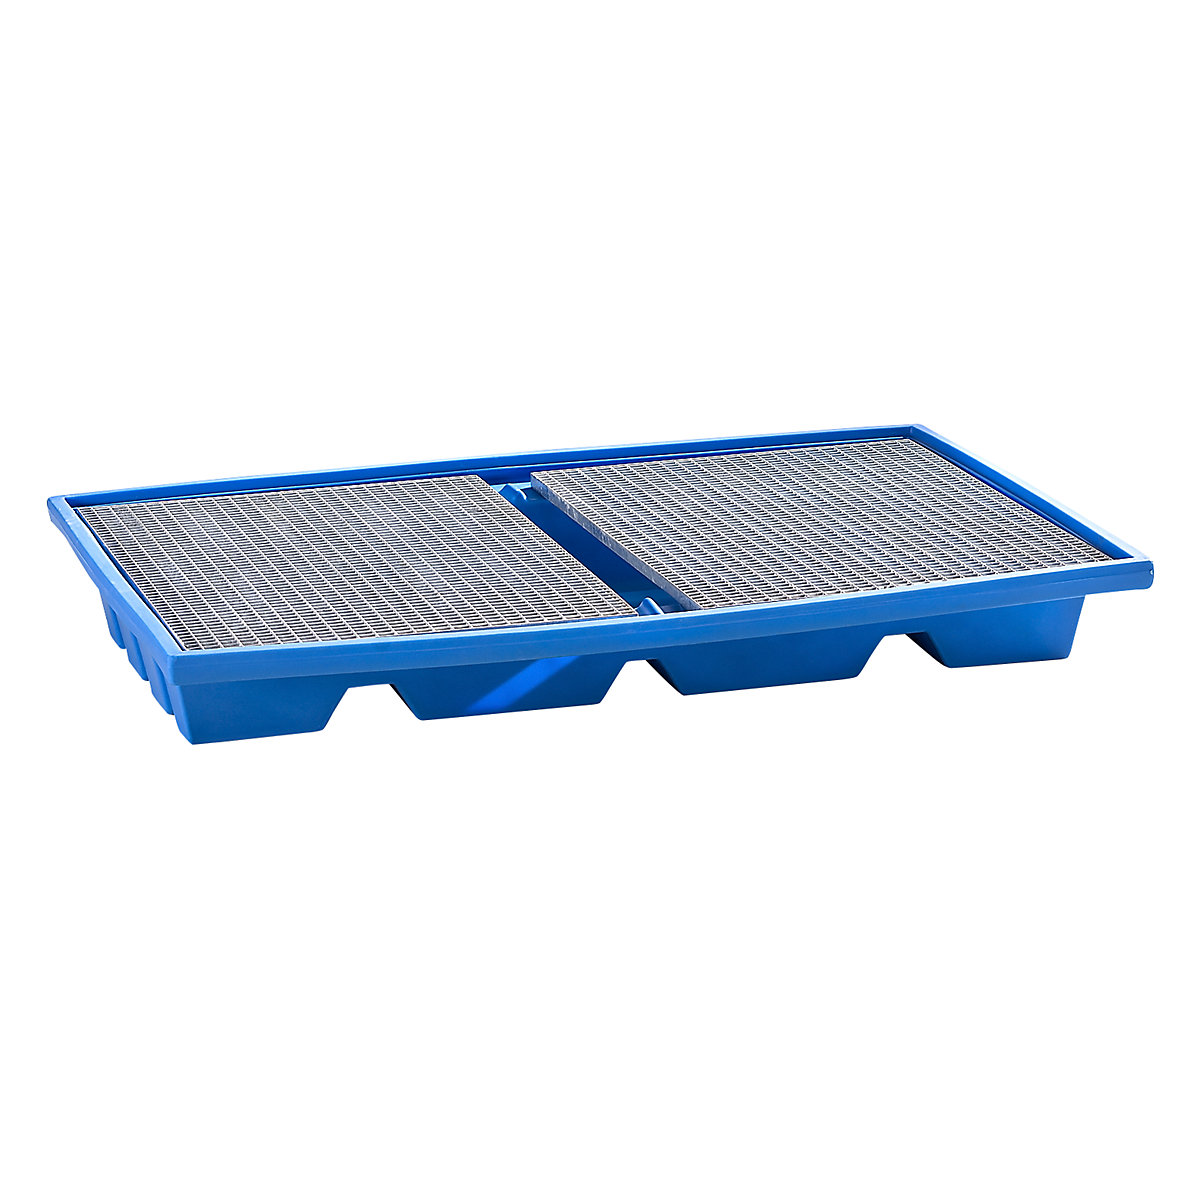 Hook-in sump tray, made of polyethylene, LxH 1780 x 240 mm, steel grate-6